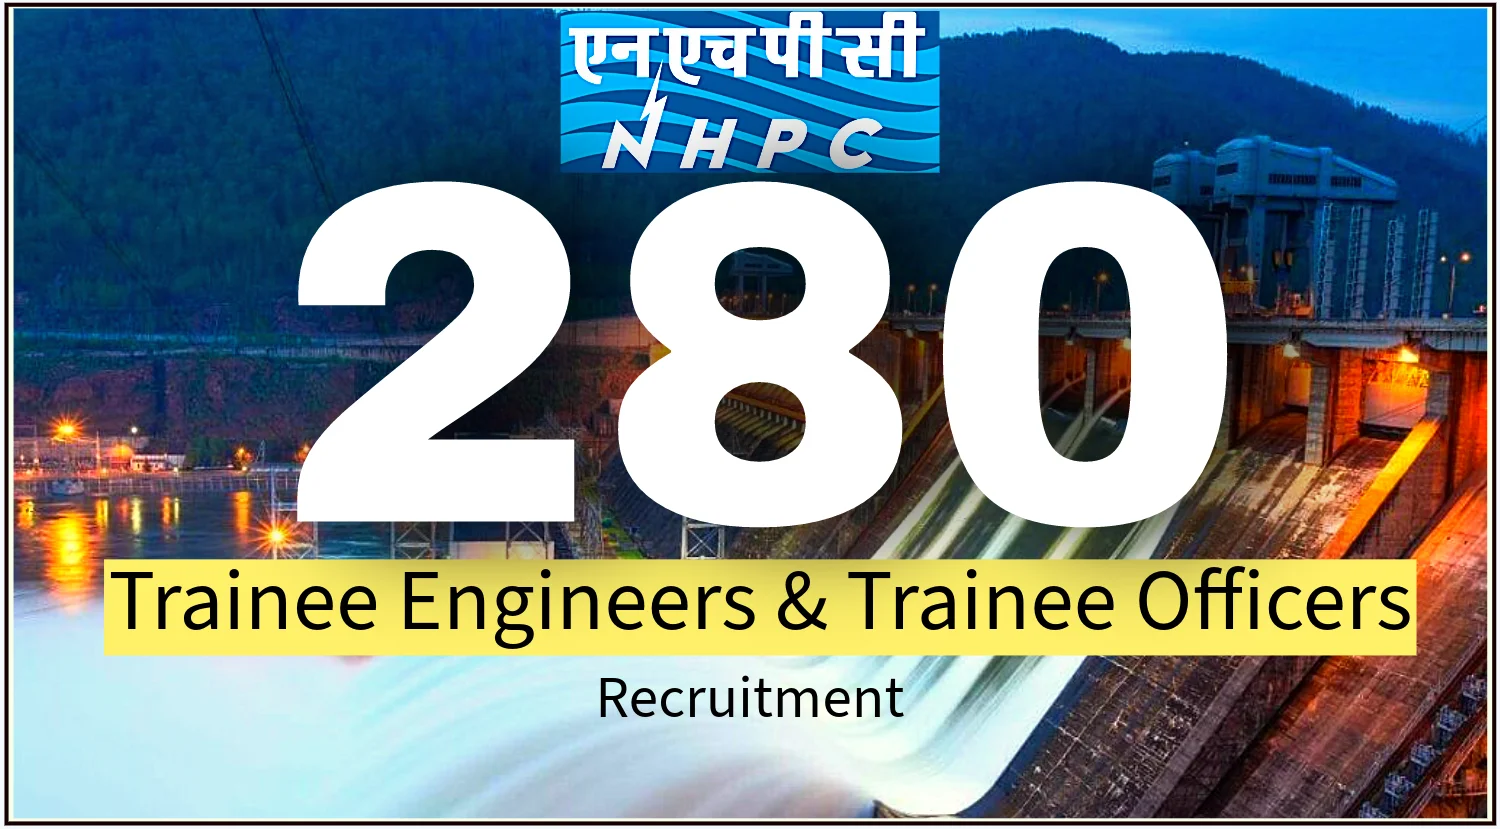 NHPC Trainee Engineers and Trainee Officers Recruitment